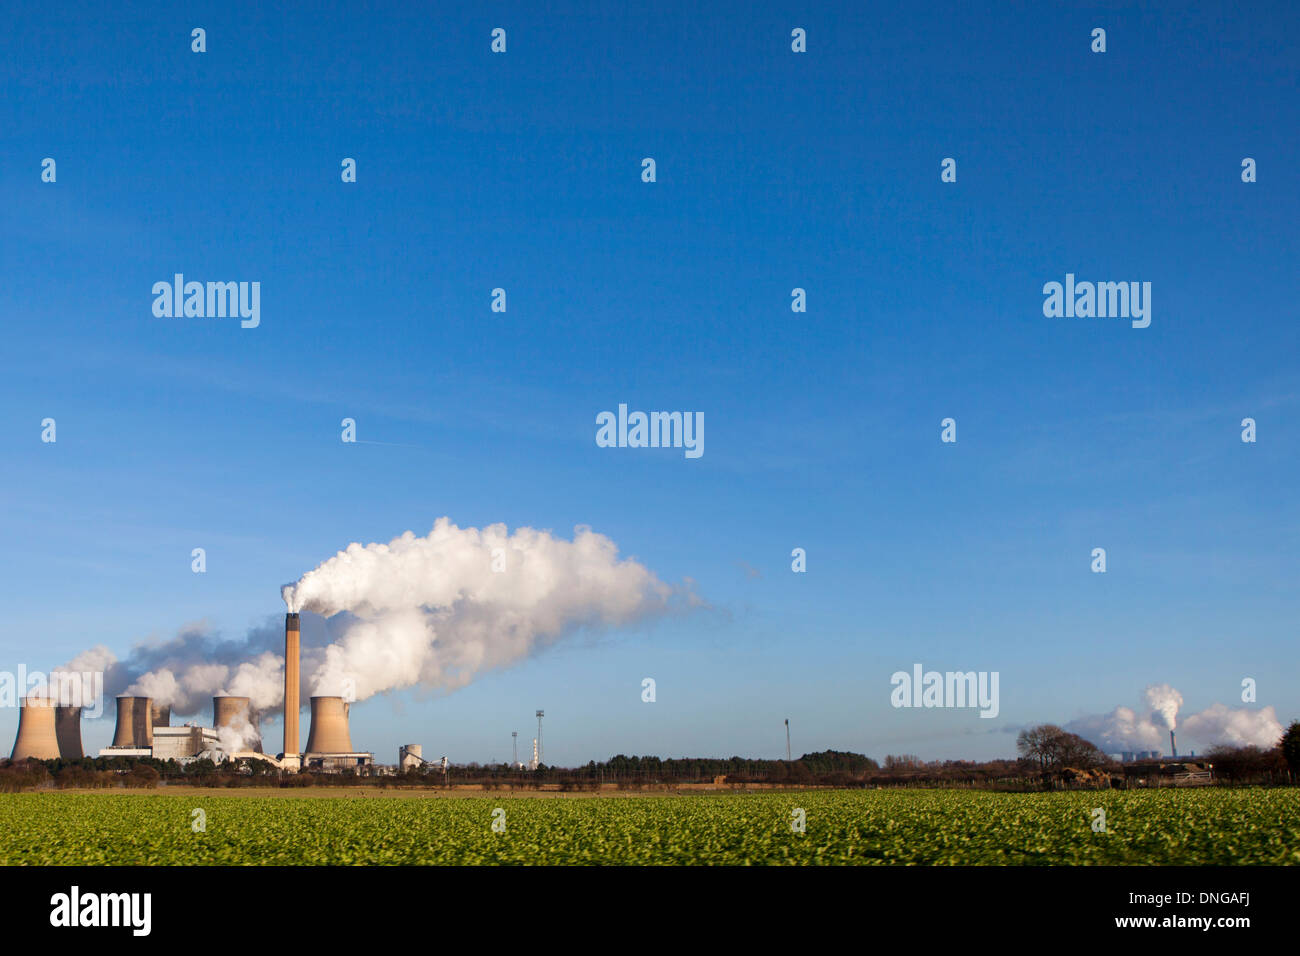 Eggborough Power Station, a large coal fired power station in North Yorkshire, England bellowing smoke into the sky Stock Photo